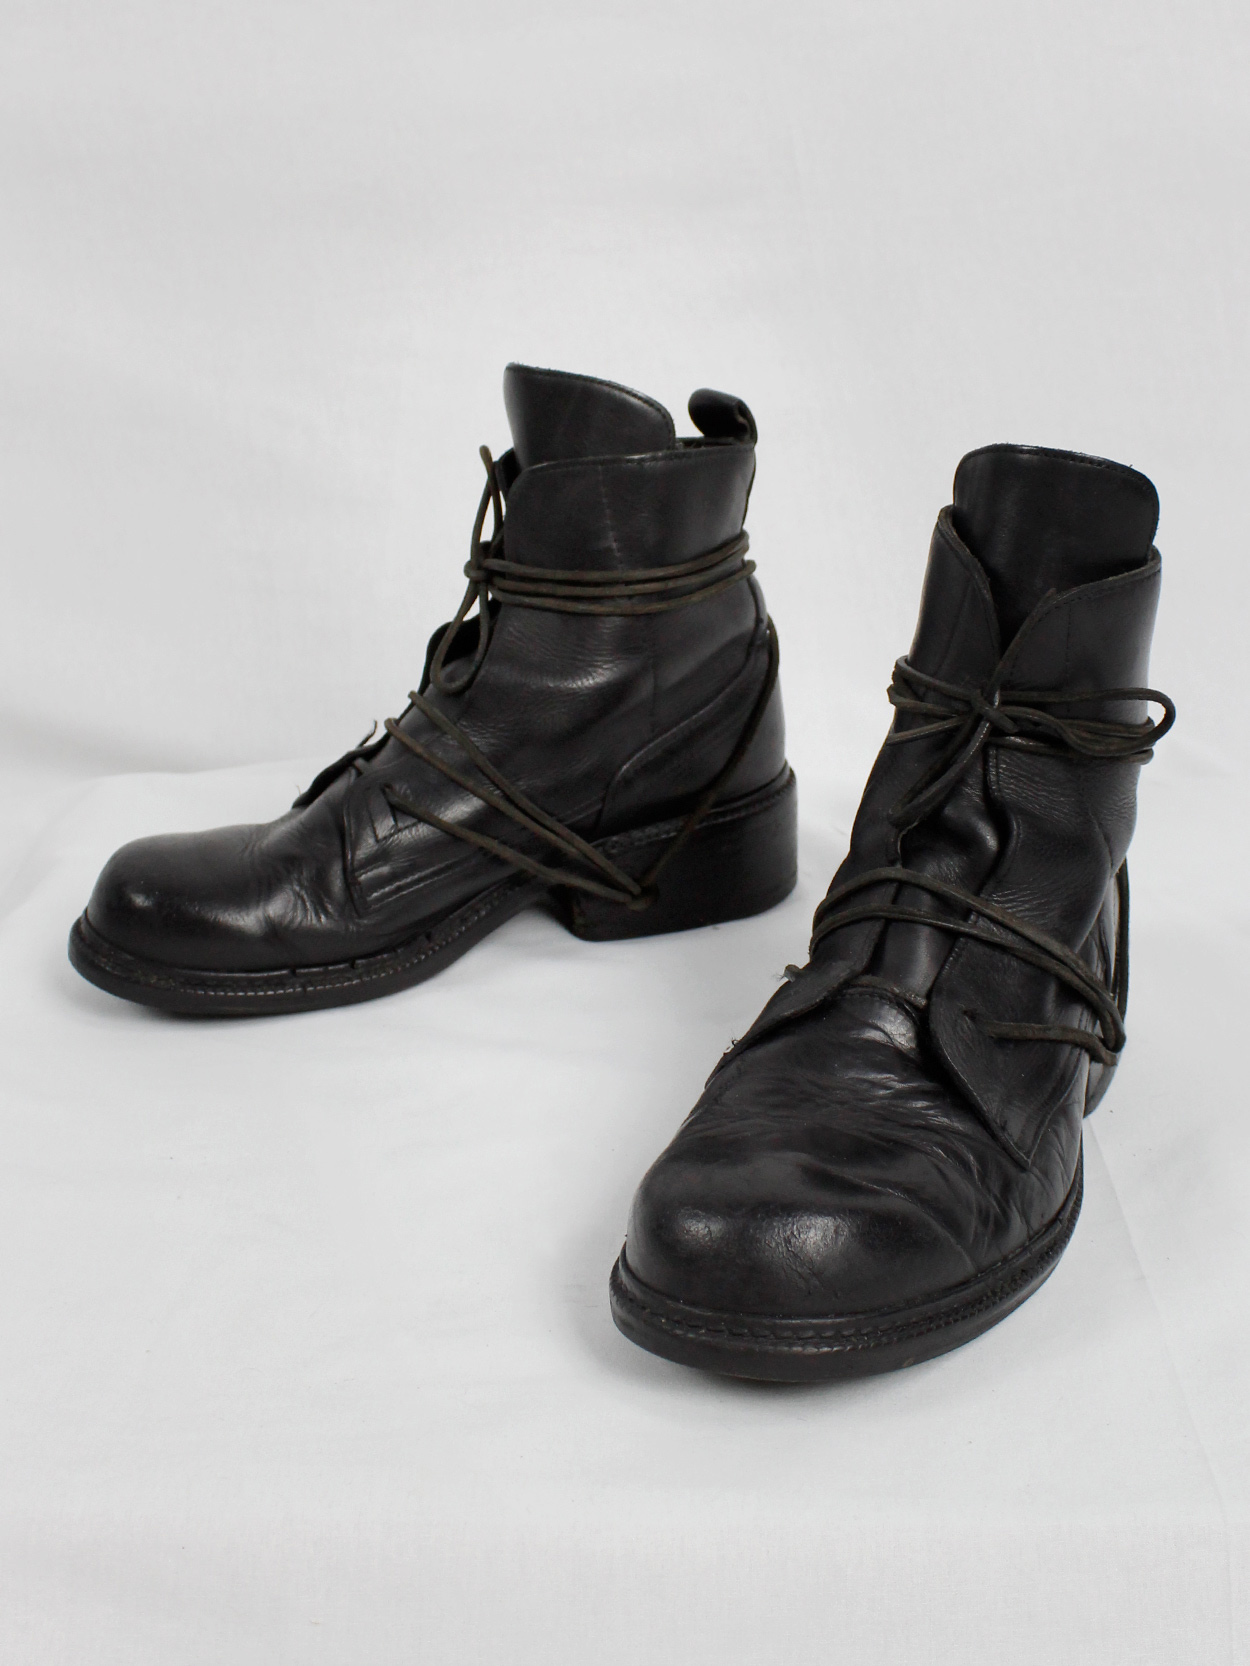 Dirk Bikkembergs black tall boots with laces through the soles (45 